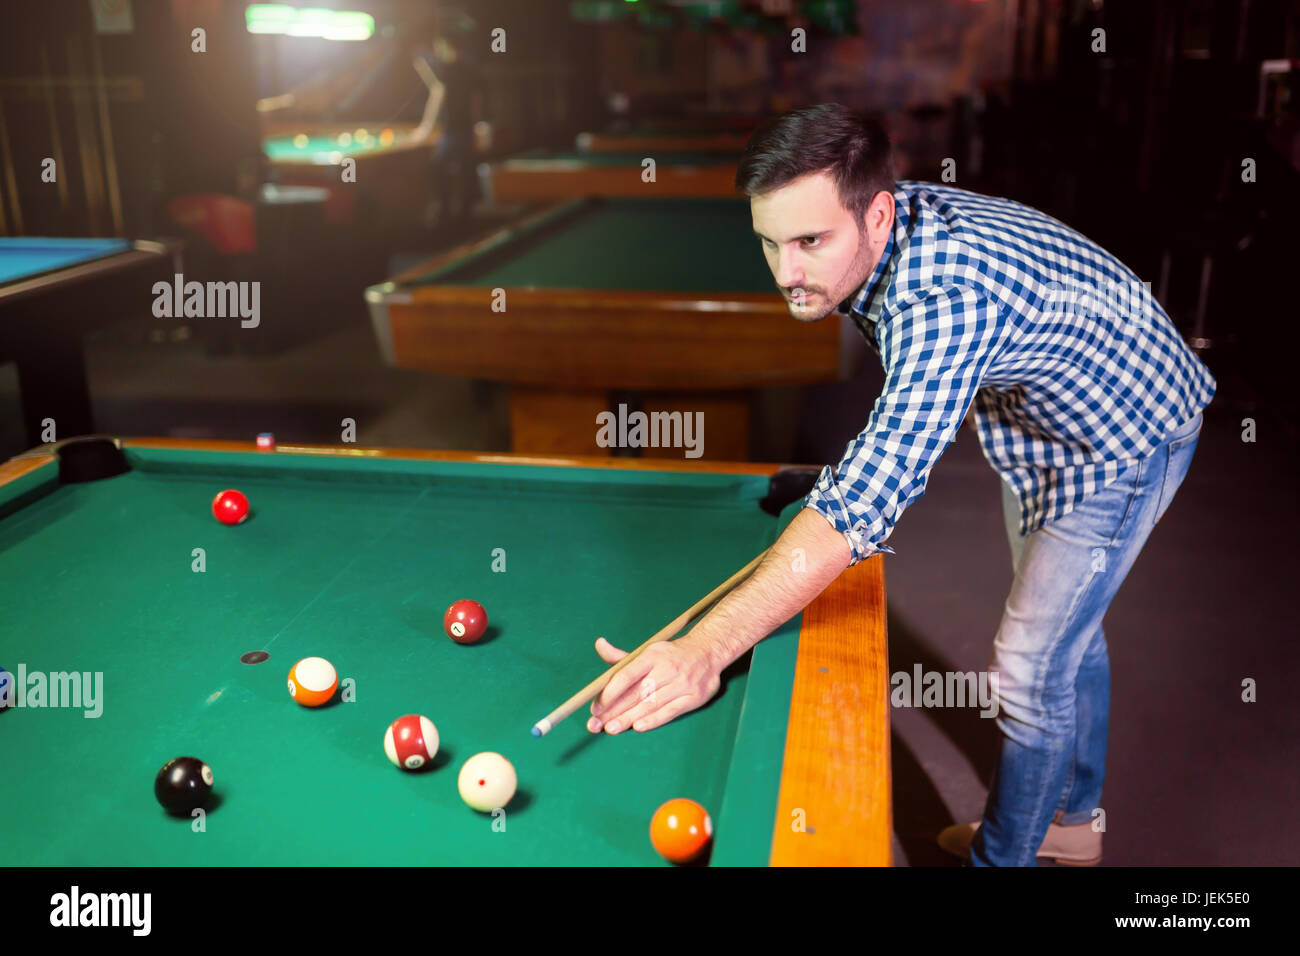 Hansome man playing pool in bar alone aiming Stock Photo